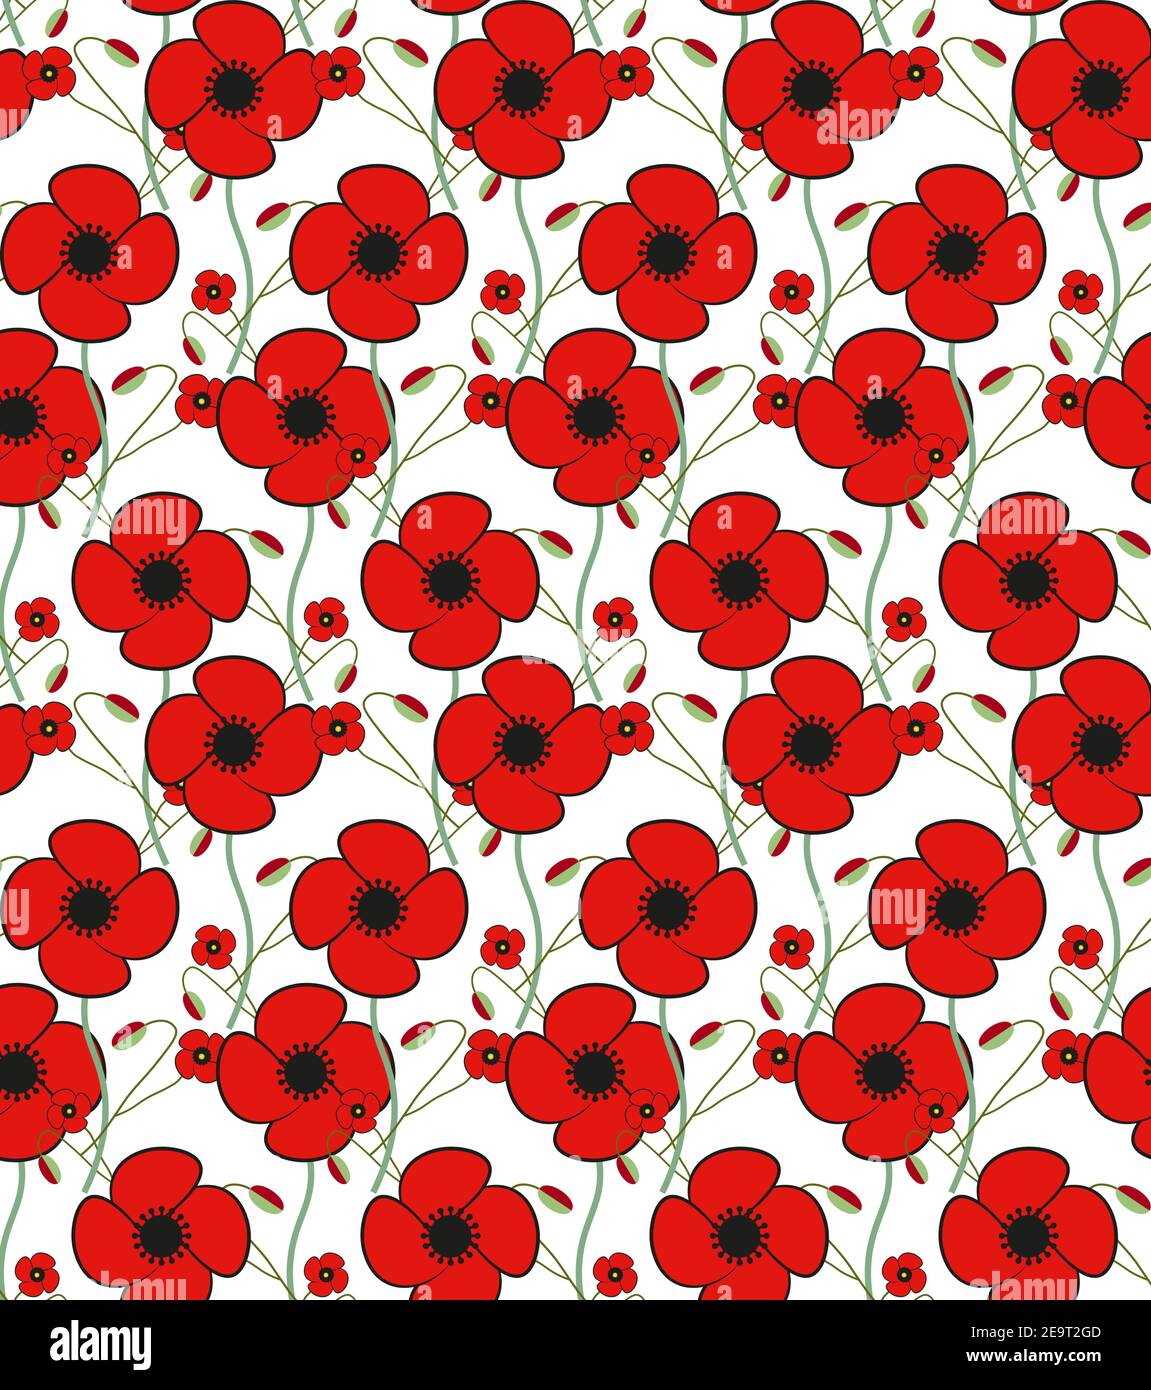 Red Poppy FIeld Wallpaper  iPhone Android  Desktop Backgrounds